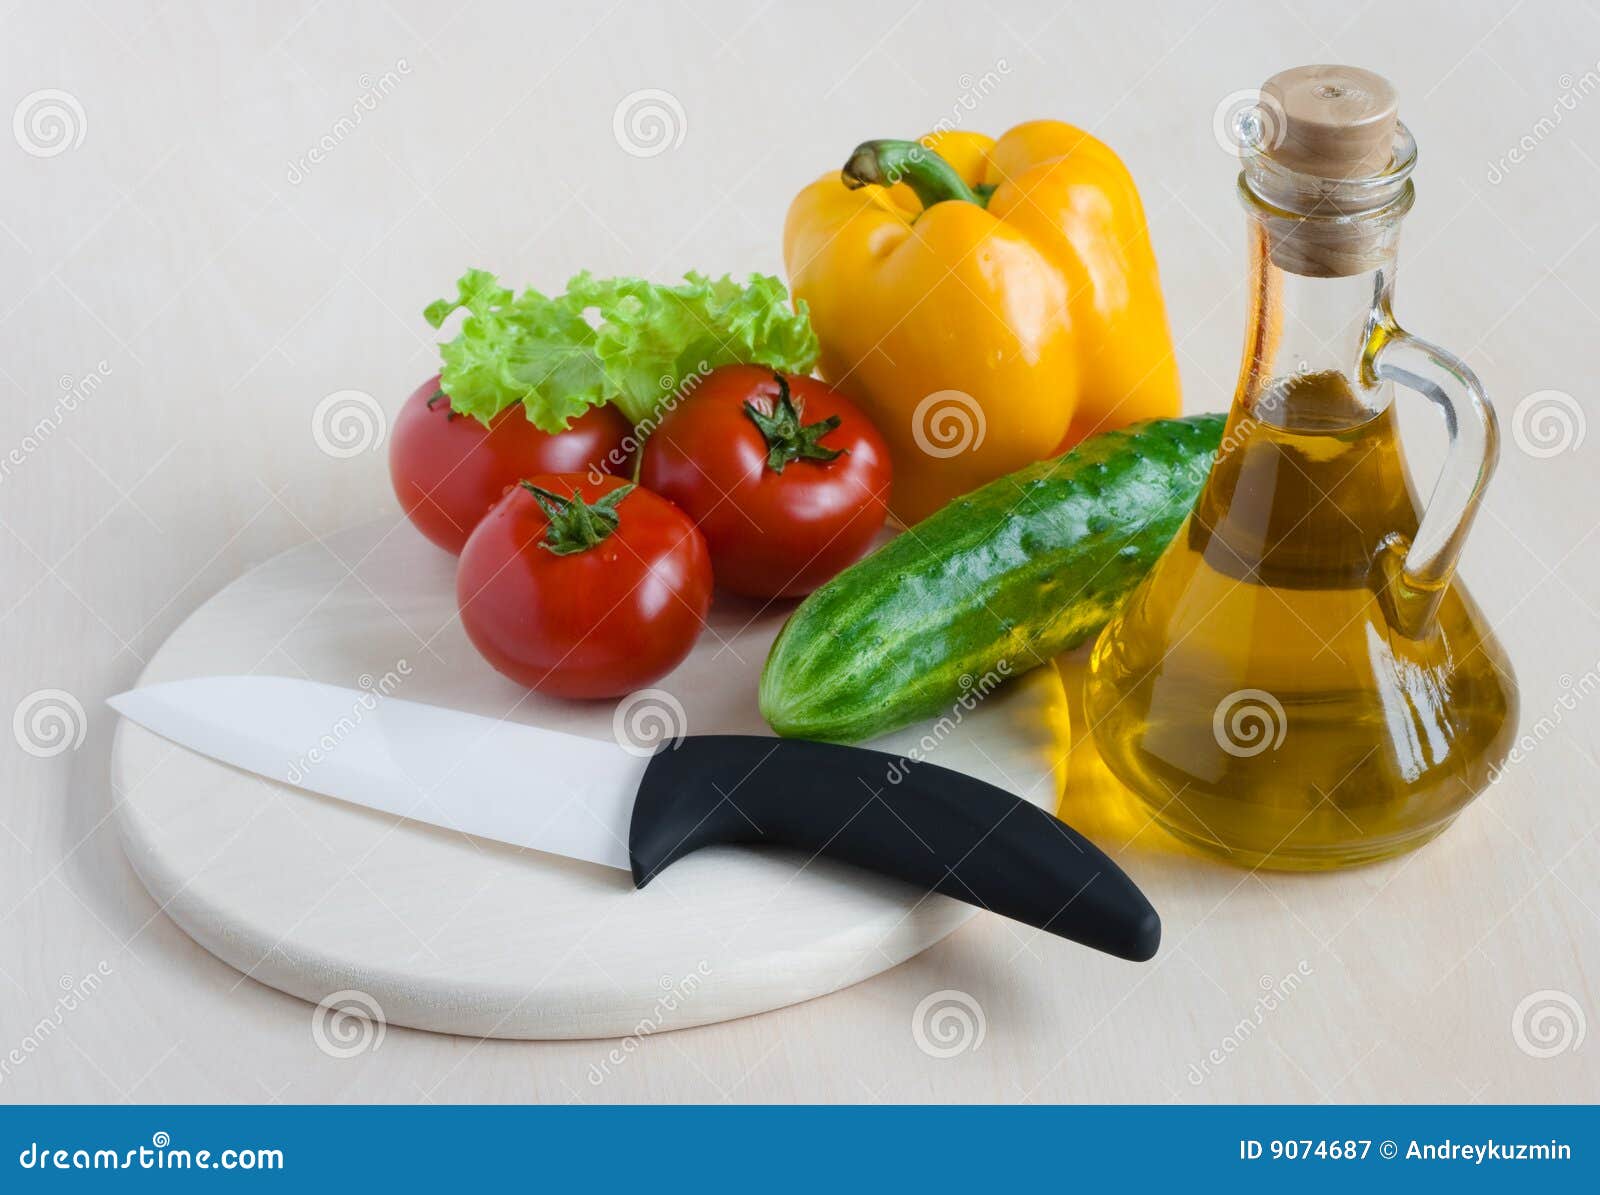 Vegetables - Healthy Food Still Life Royalty Free Stock Photography ...